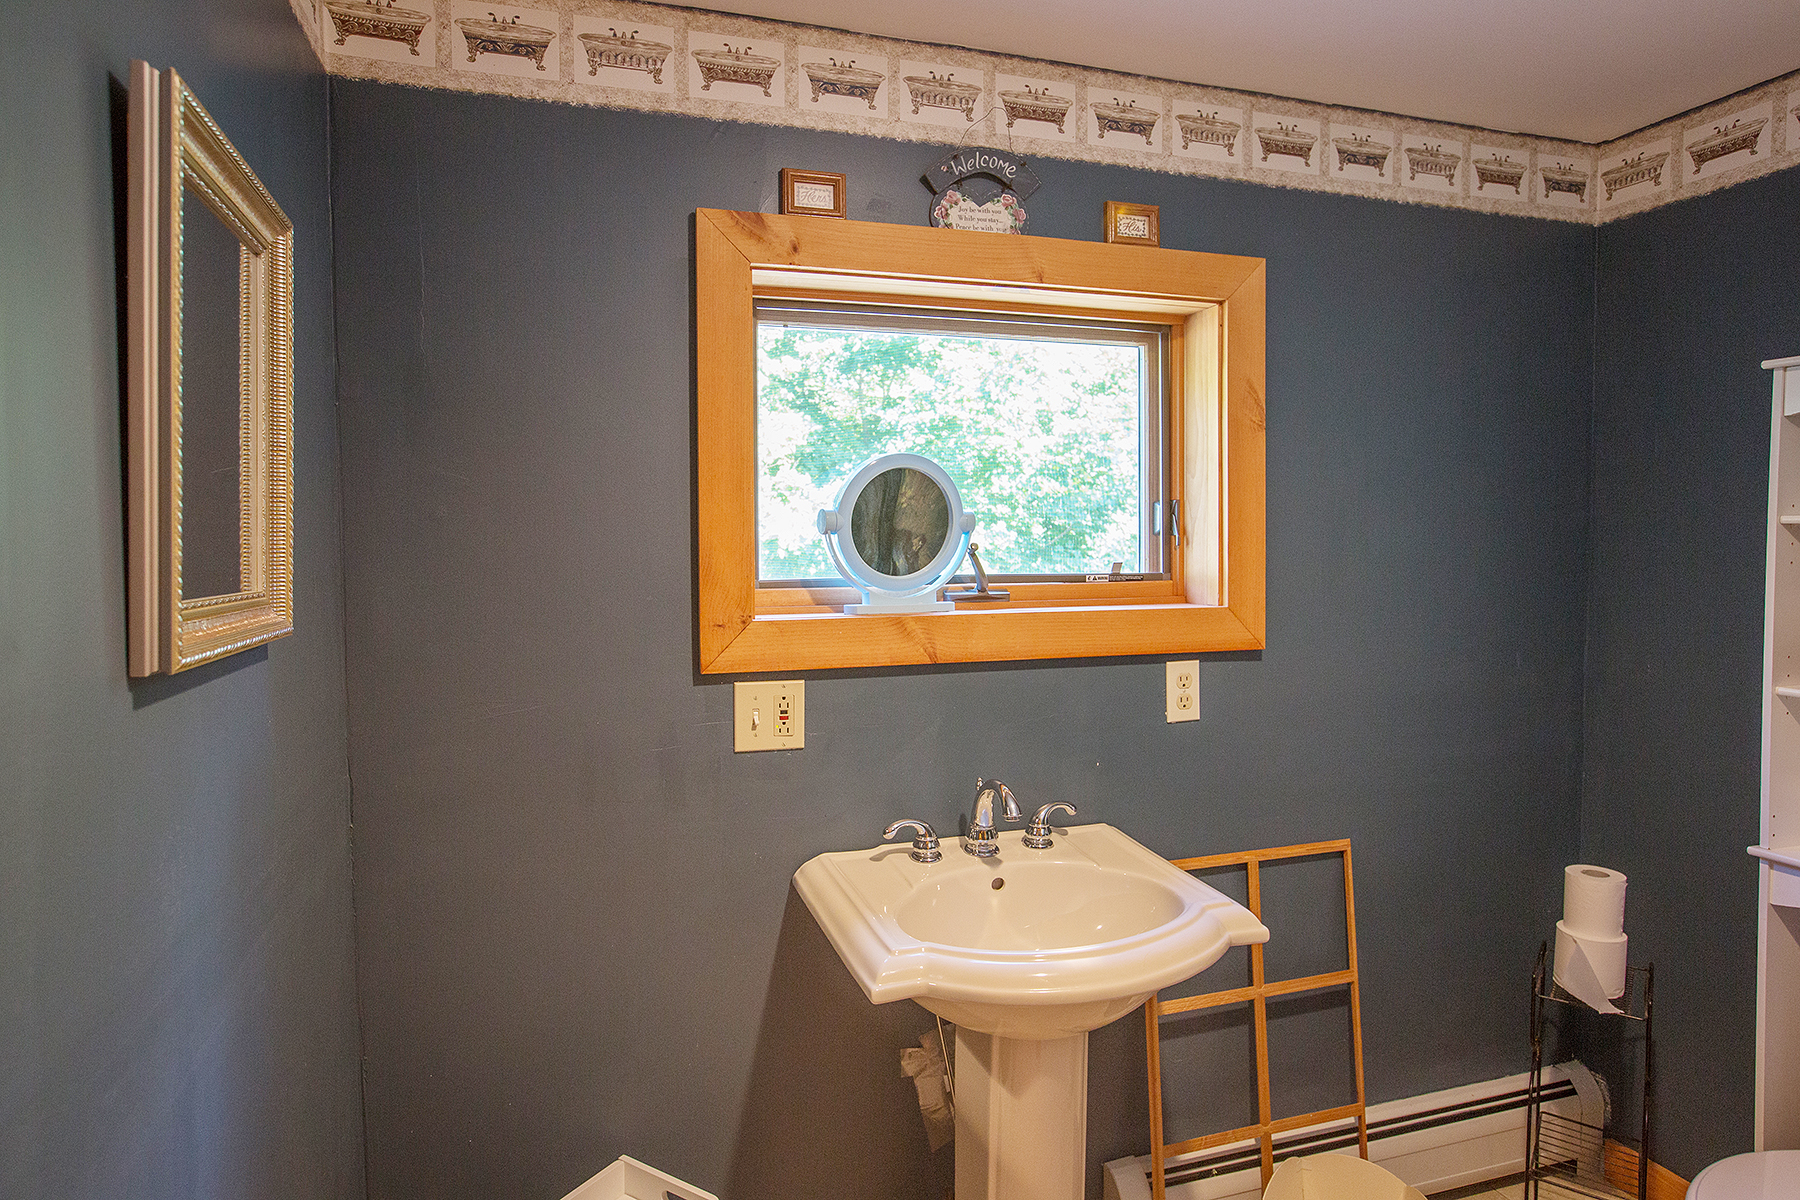  Bathroom with pedestal sink and dark grey walls.  Small window is above the sink that has a wood frame around it. 